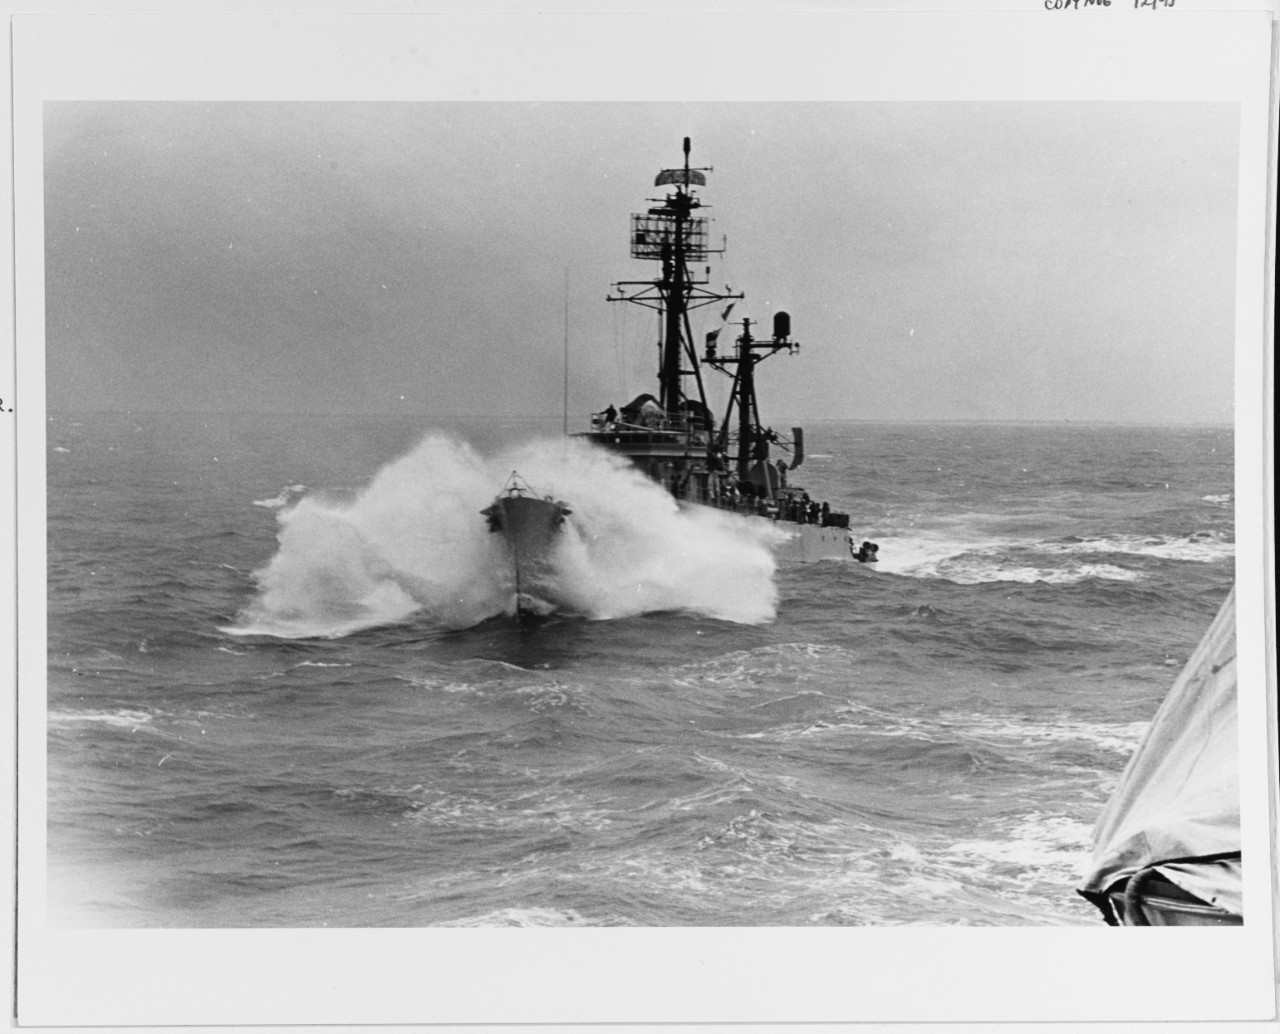 A DER "breaks water" in the South China Sea, 10 October 1966.